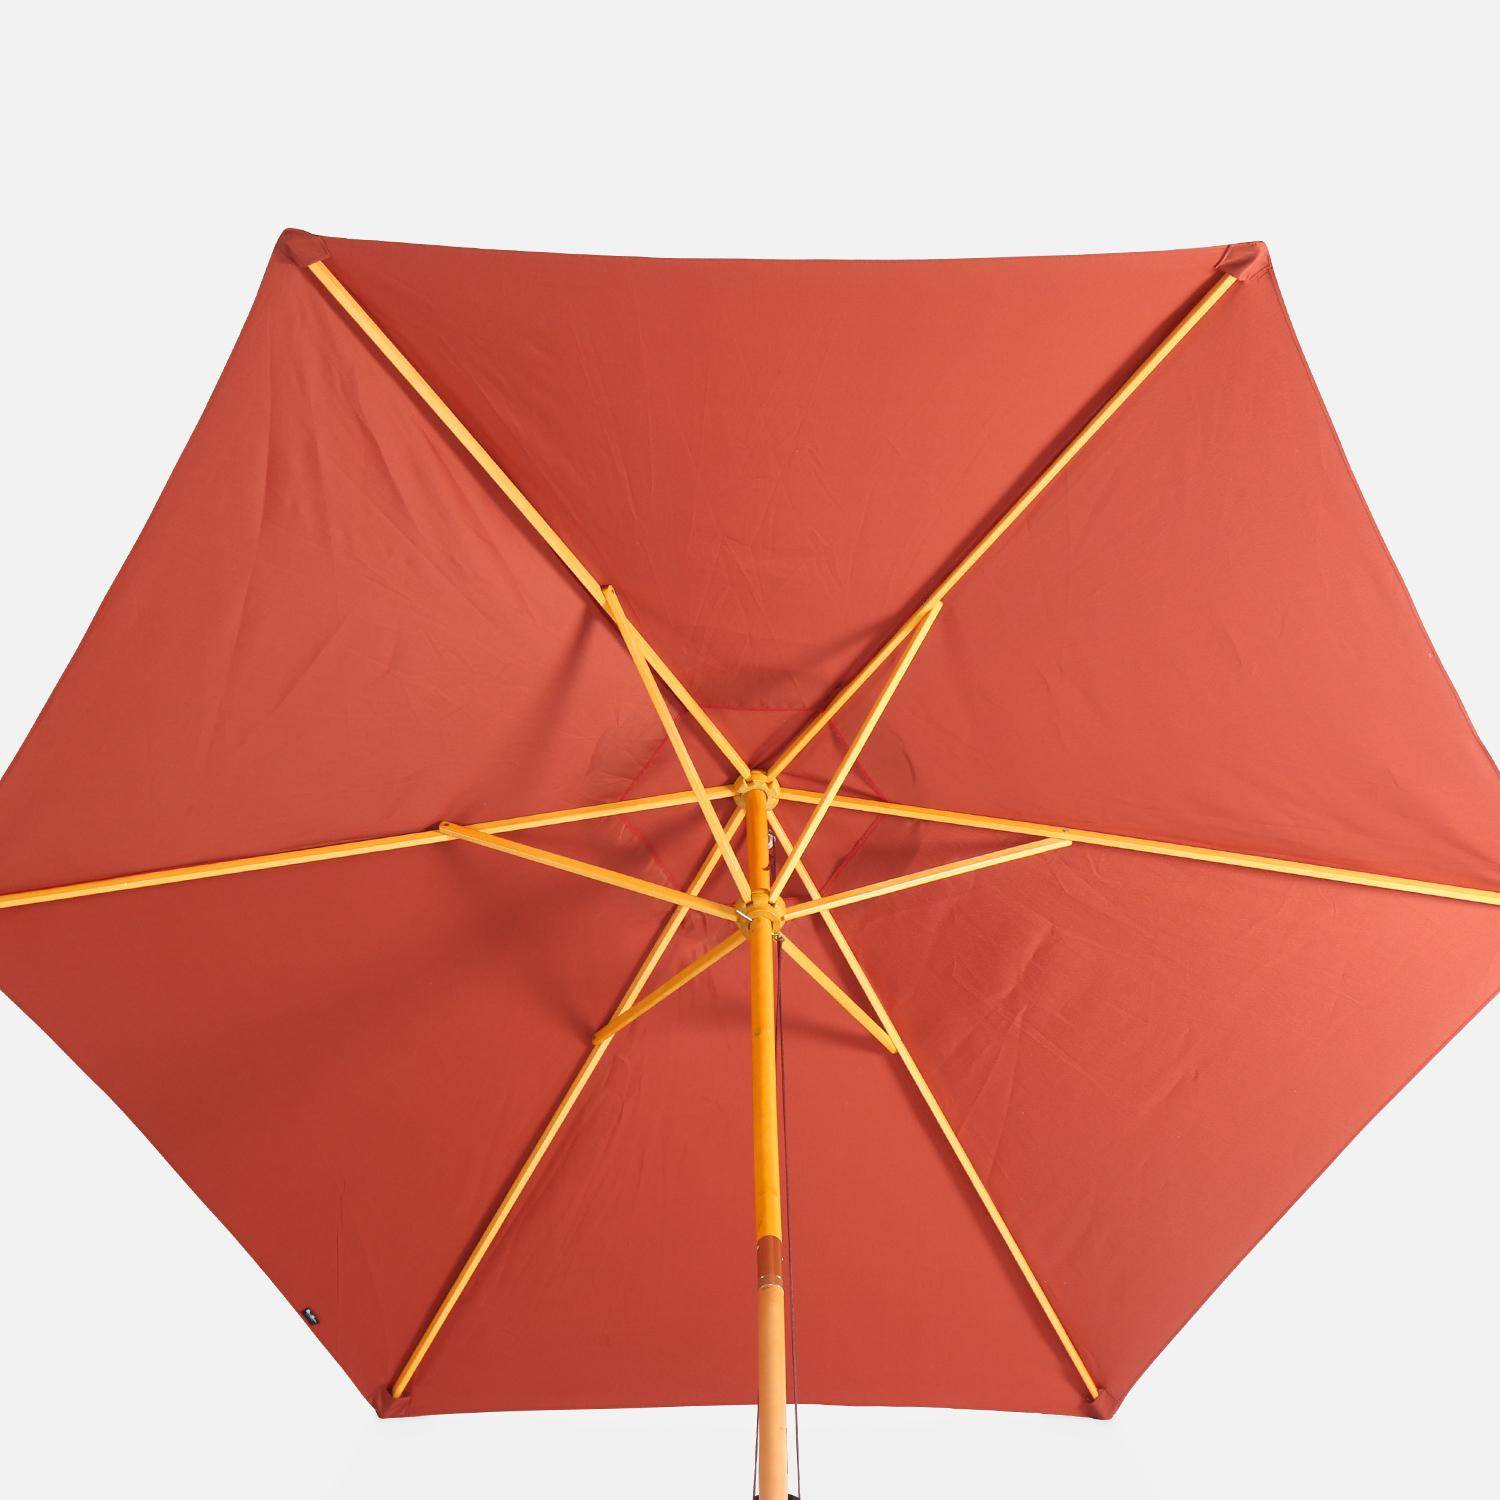 Round wooden parasol Ø300cm with straight pole -  adjustable aluminium central mast in wood and crank handle opening - Cabourg - Terracotta,sweeek,Photo3